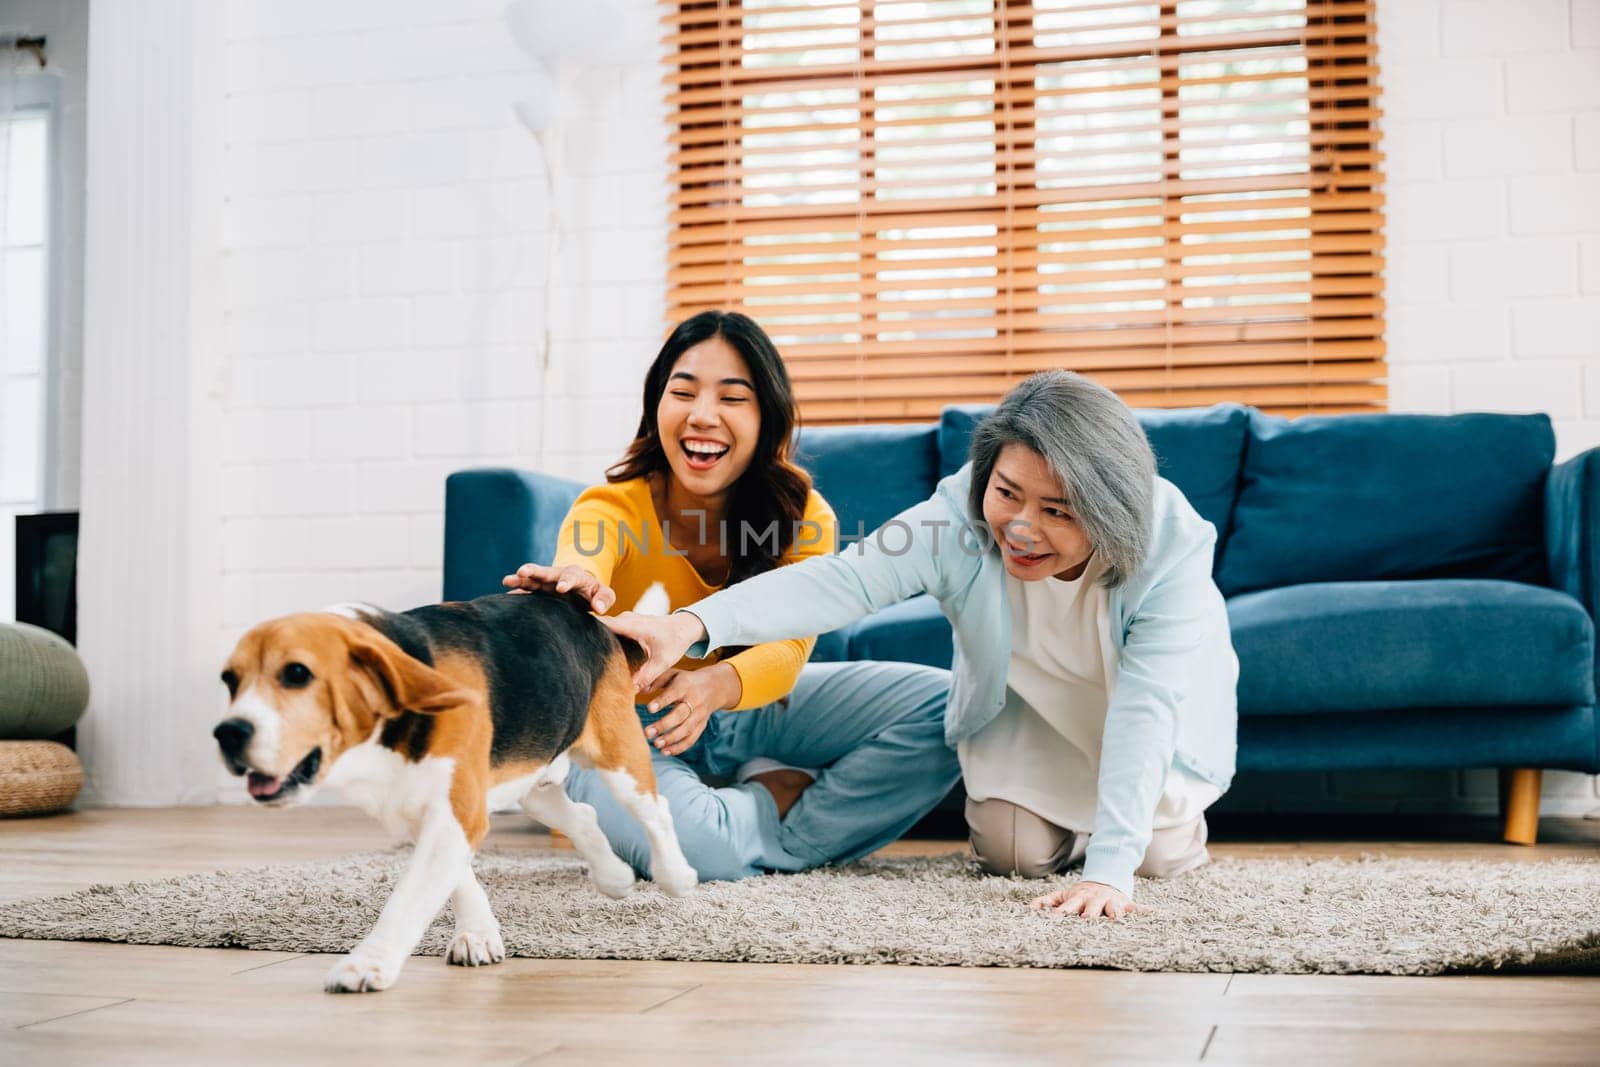 In their cozy living room, a barefoot woman and her mother run with their Beagle dog, showcasing their active and friendly lifestyle. It's a delightful scene of family togetherness. pet love by Sorapop